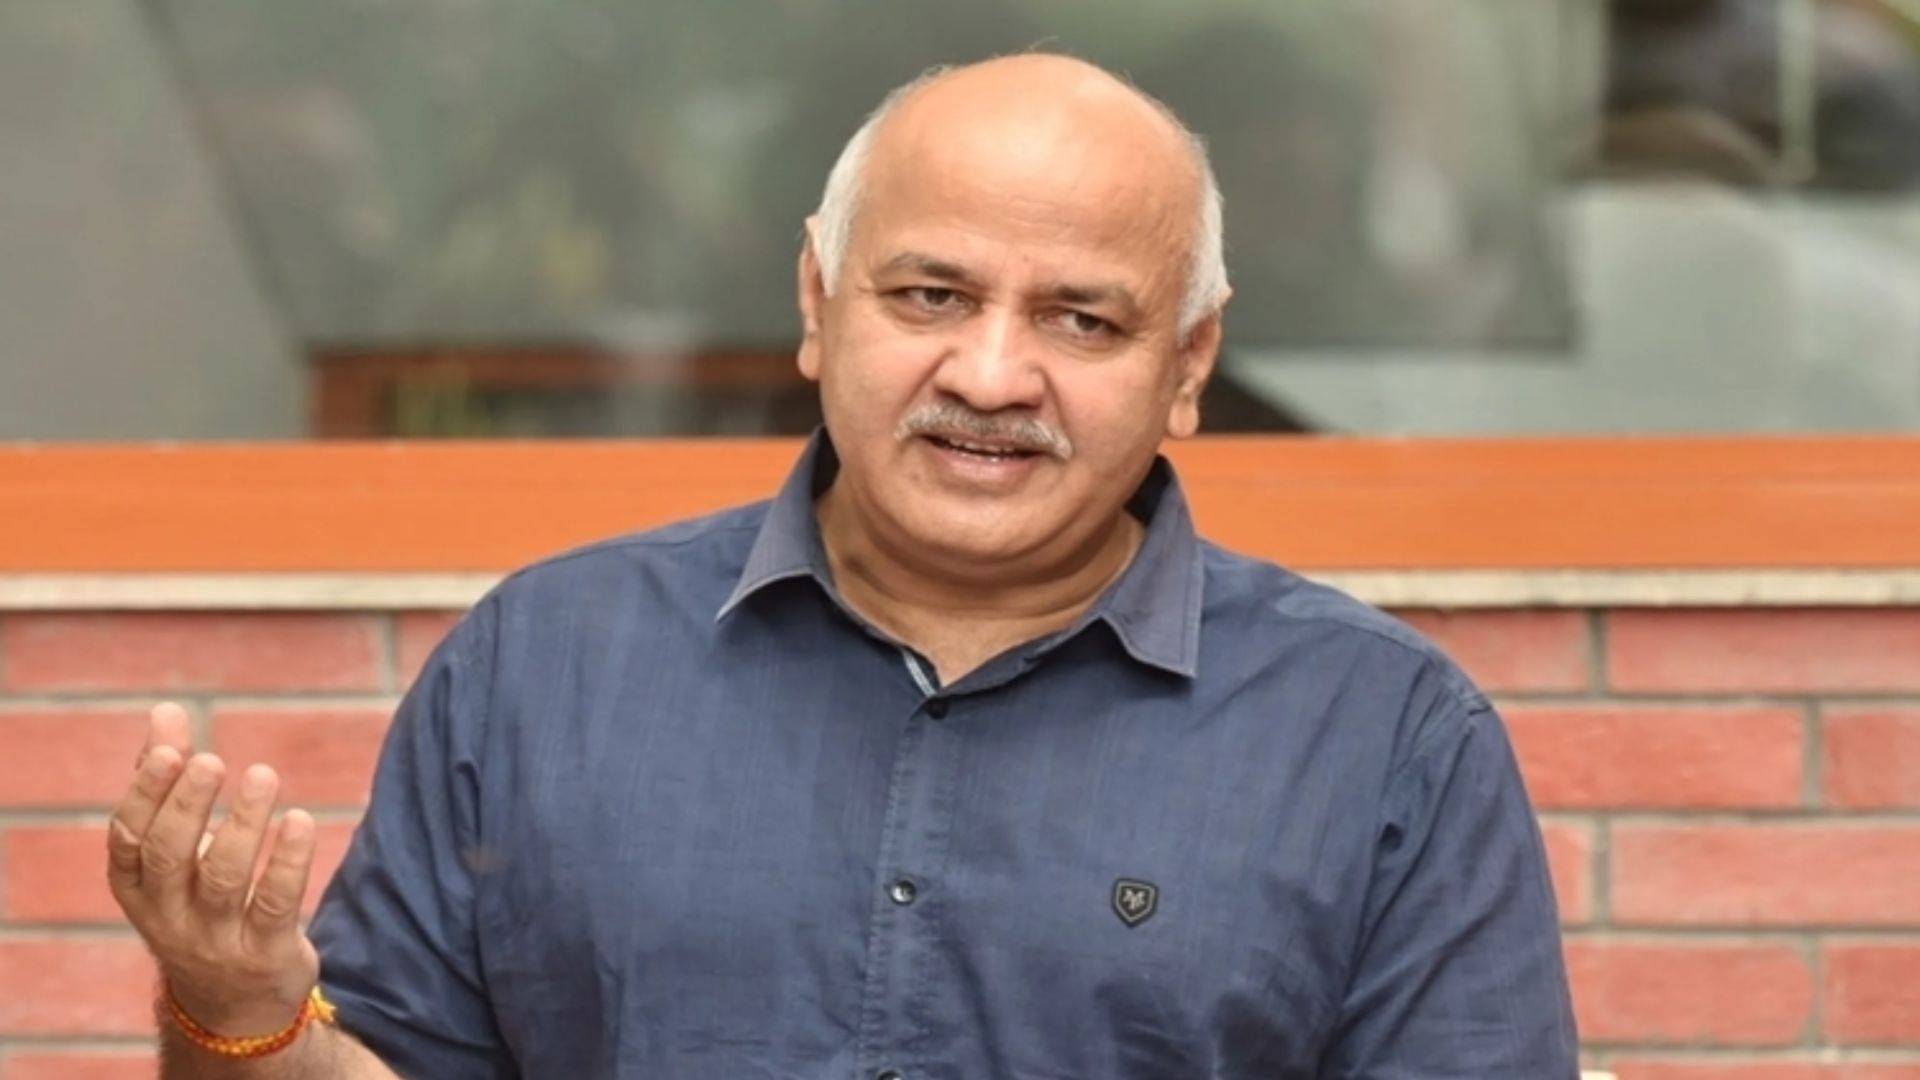 Through its Manish Sisodia case judgment, SC may have again empowered ED as state within state